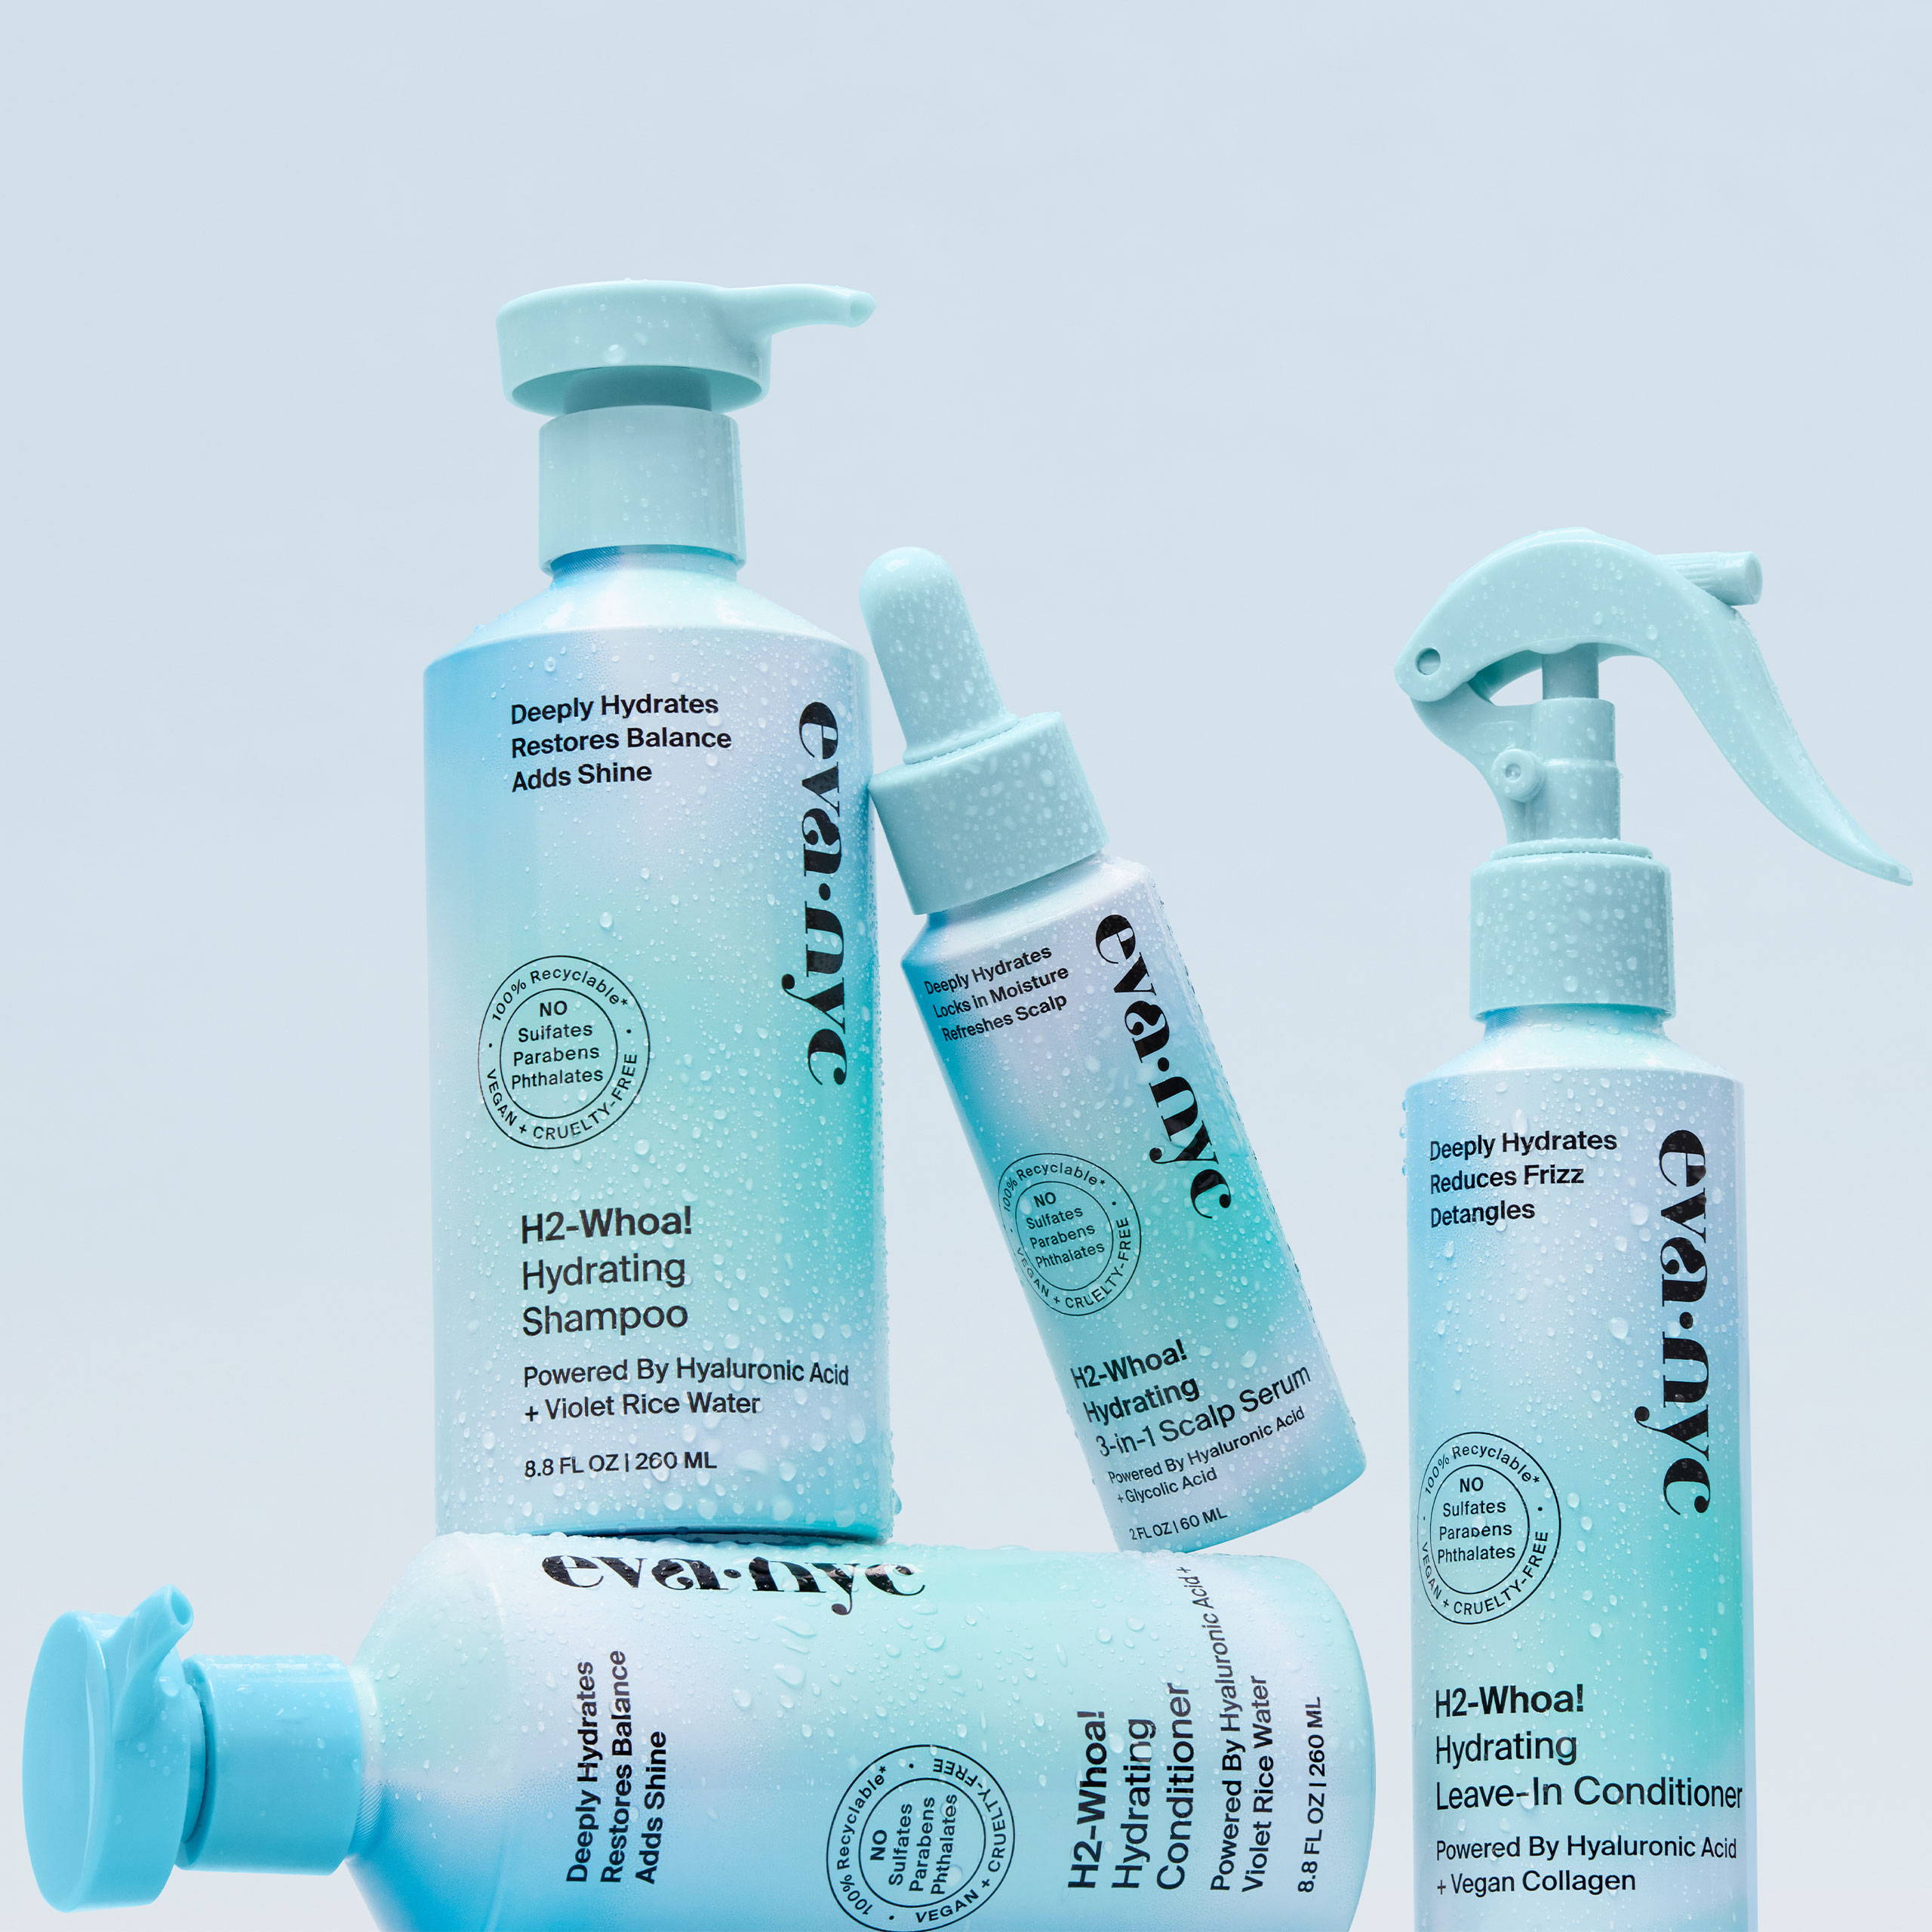 Eva NYC's hydrating hair products